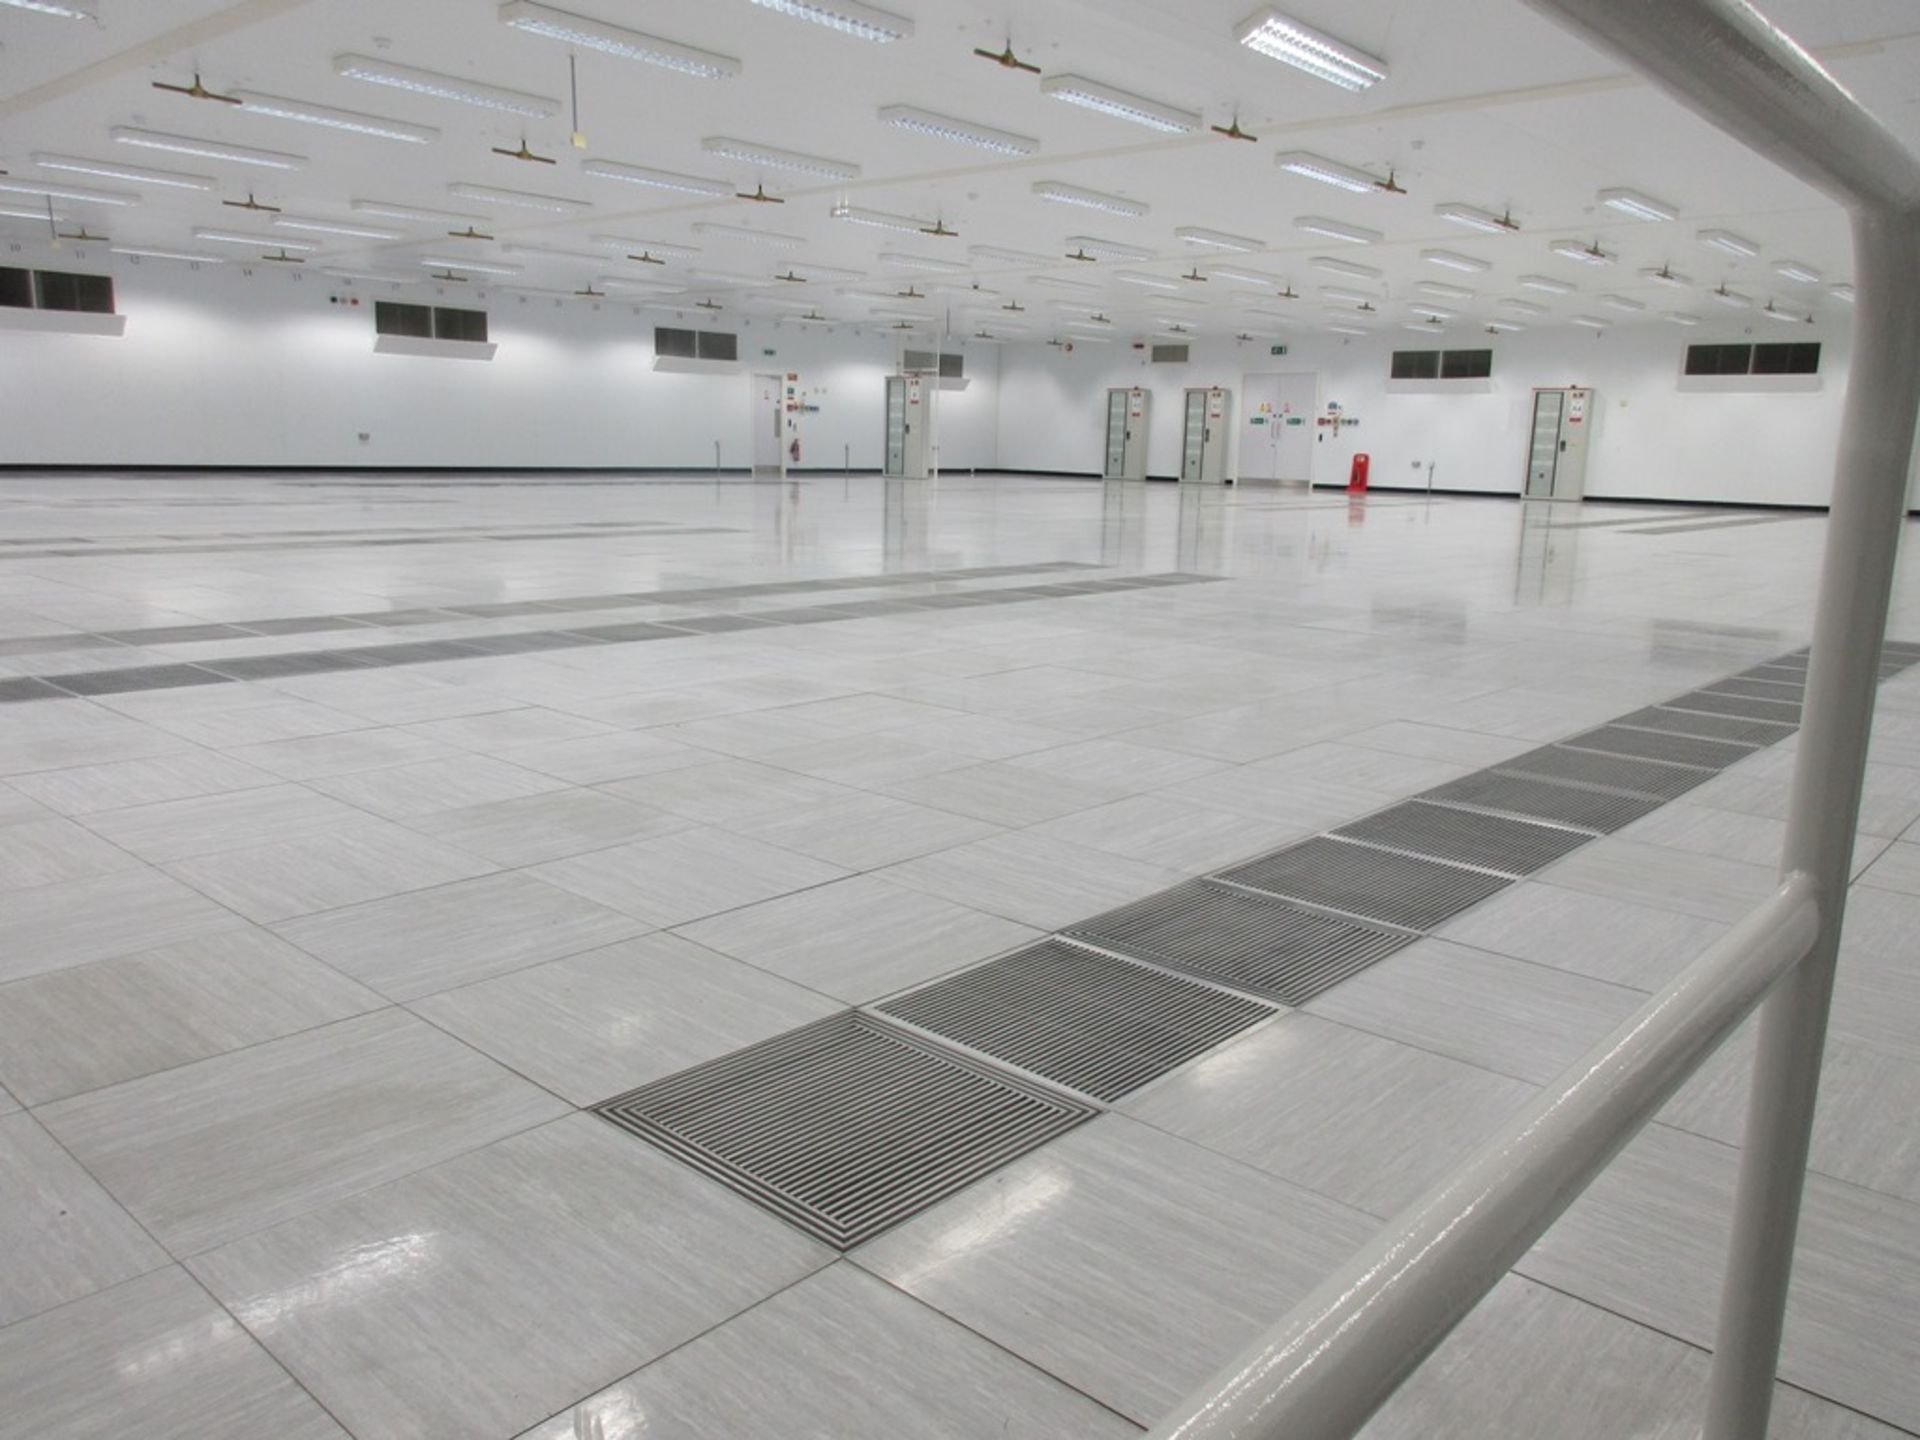 Raised sectional server room modular flooring to approximately 30 x 25m, 650mm high with single